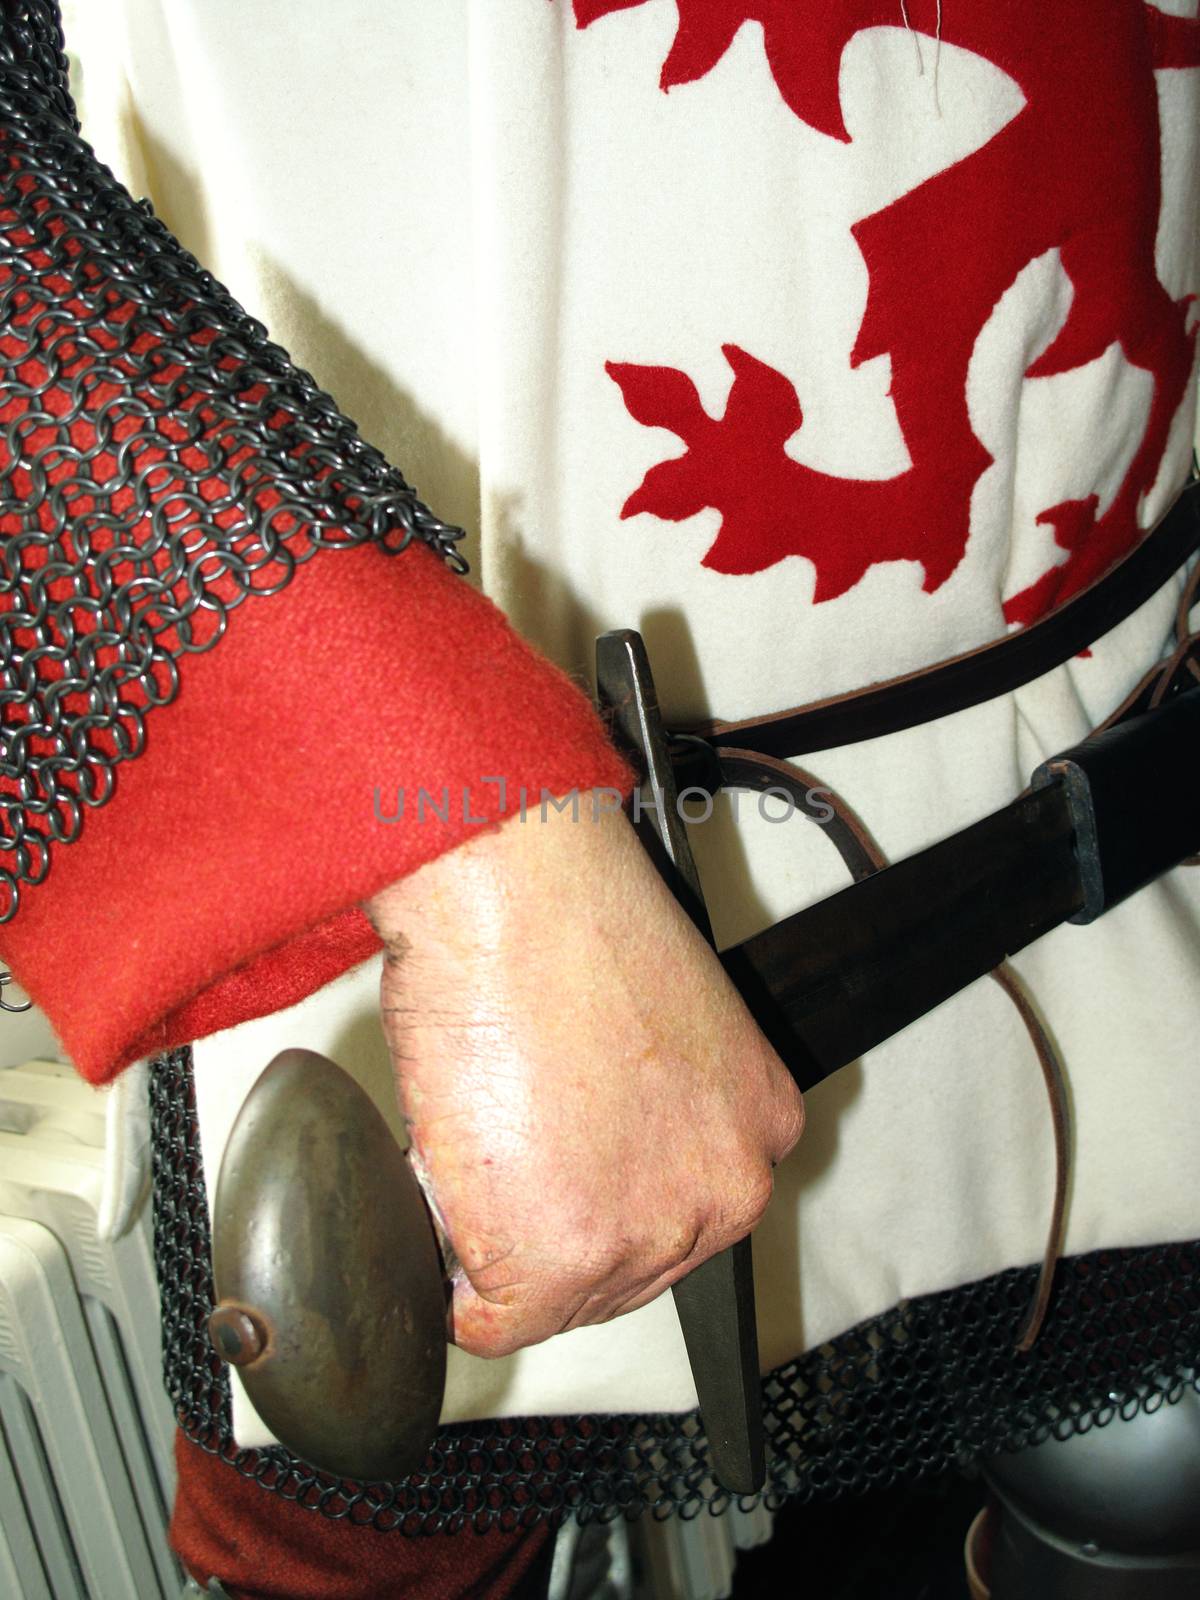 Manikin of a crusader medieval knight in chain mail armour bearing the heraldic lion rampant the royal standard of the king of England stock photo